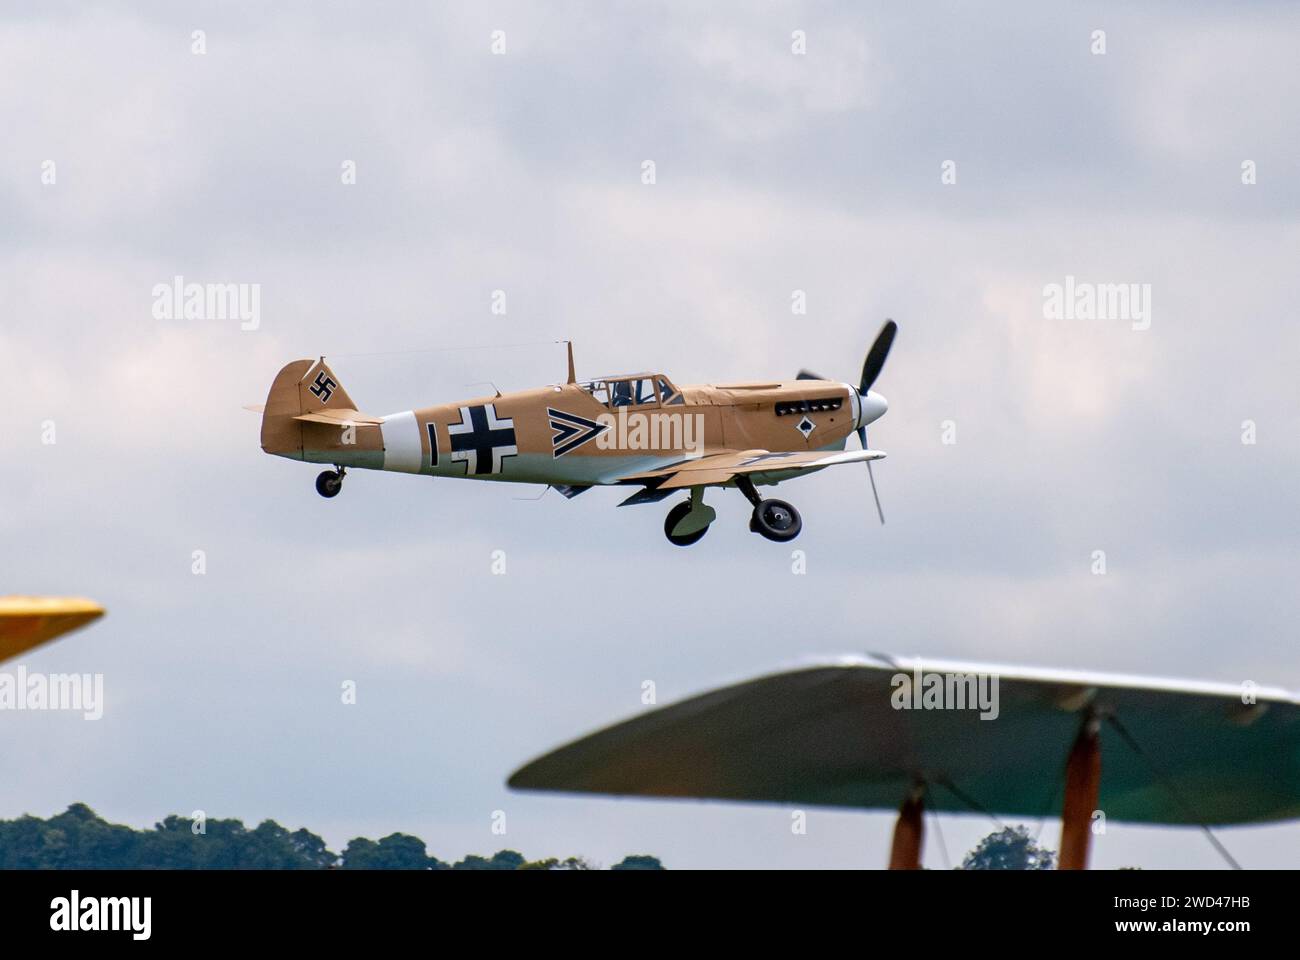 Messerschmitt Bf 109 with Hispano engine in formation flight. The well known Gerrman WW2 Fighter plane ME109 Stock Photo